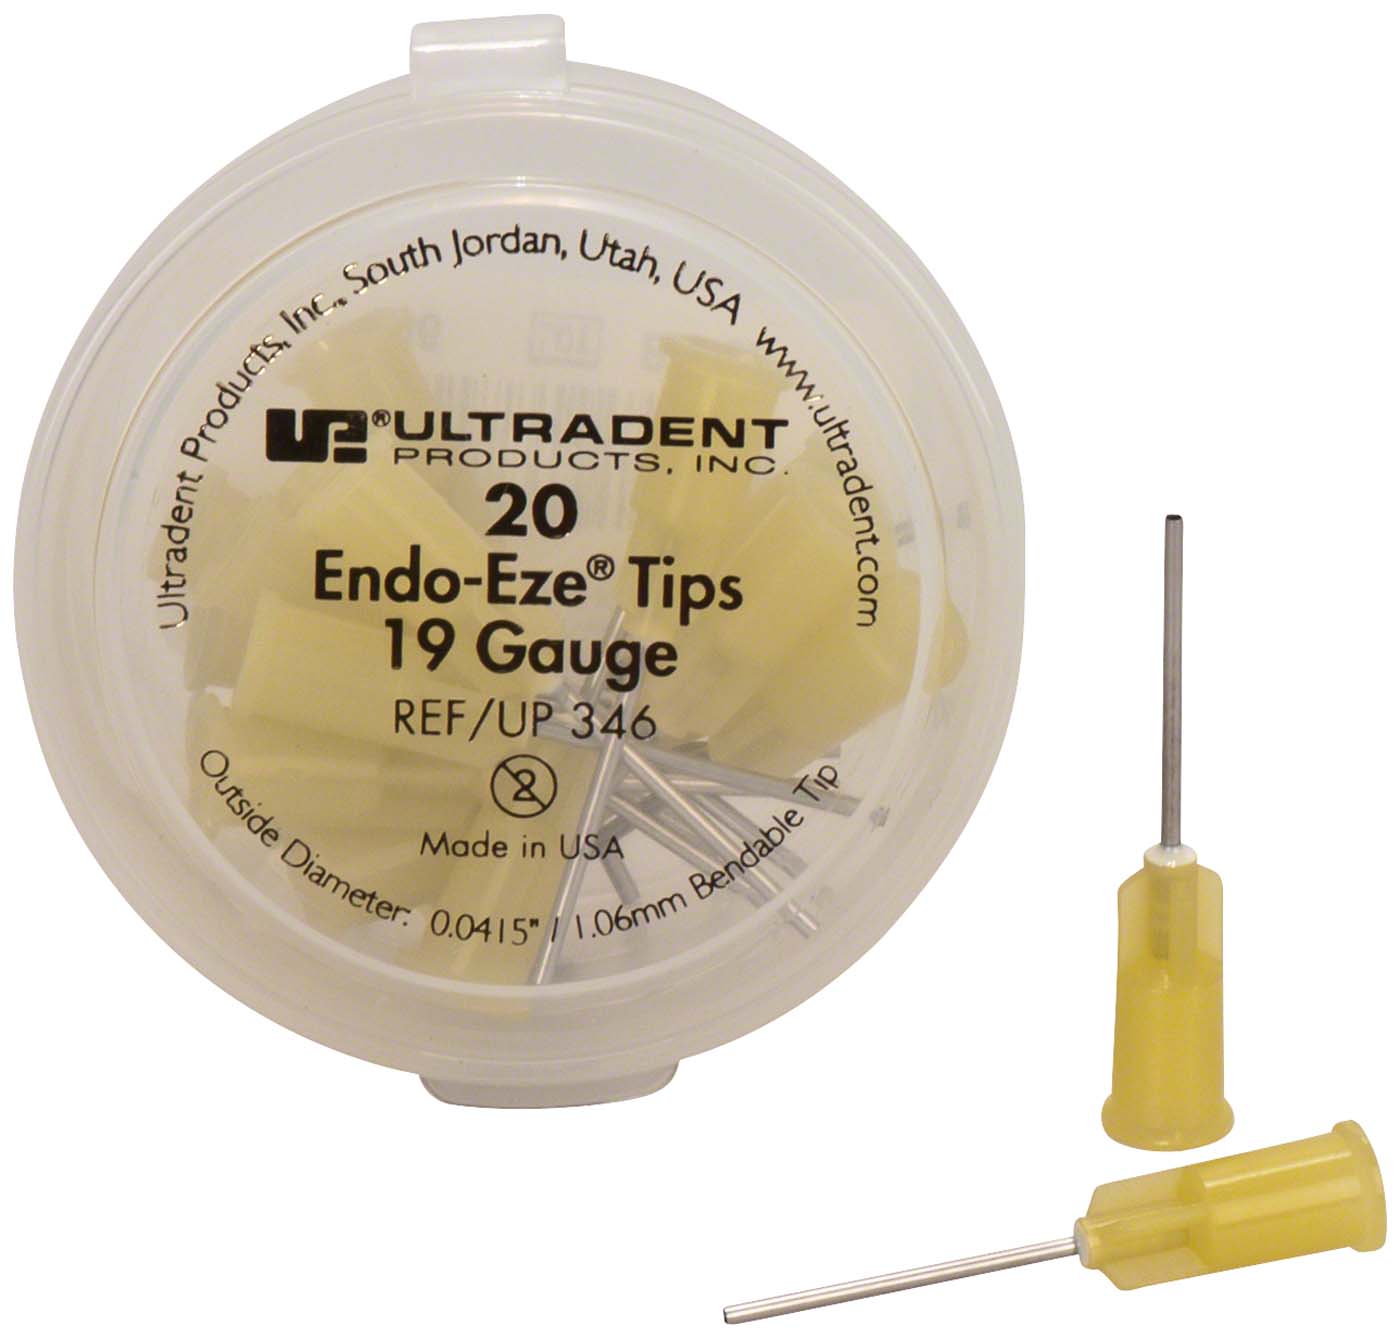 Endo-Eze™ Tips Ultradent Products